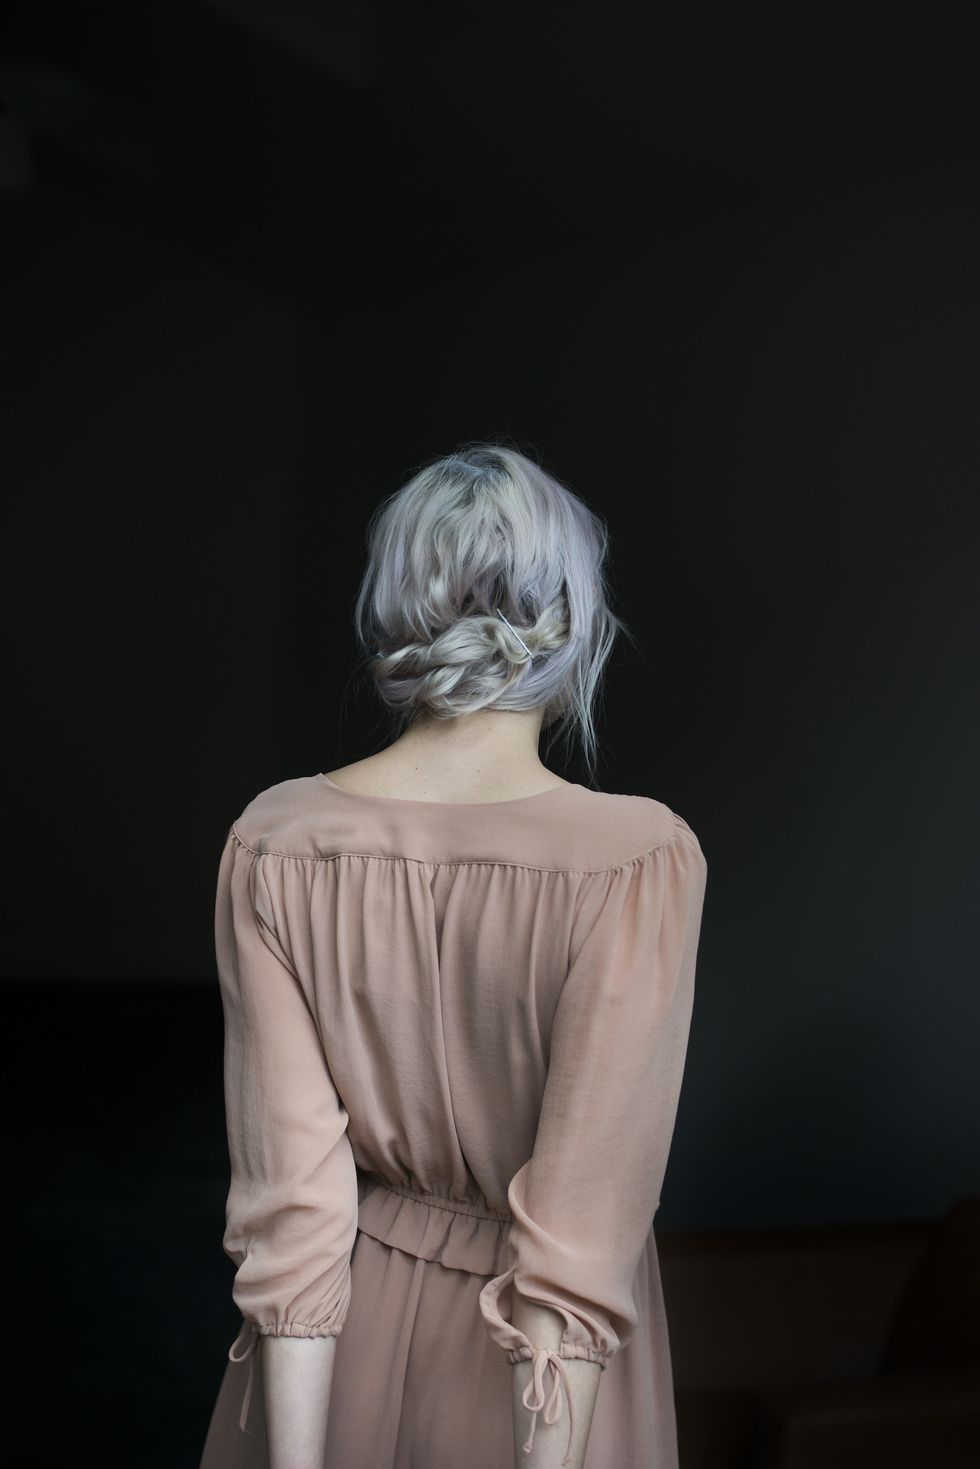 Hair, Shoulder, Dress, Beauty, Hairstyle, Blond, Fashion, Photography, Hand, Neck, 